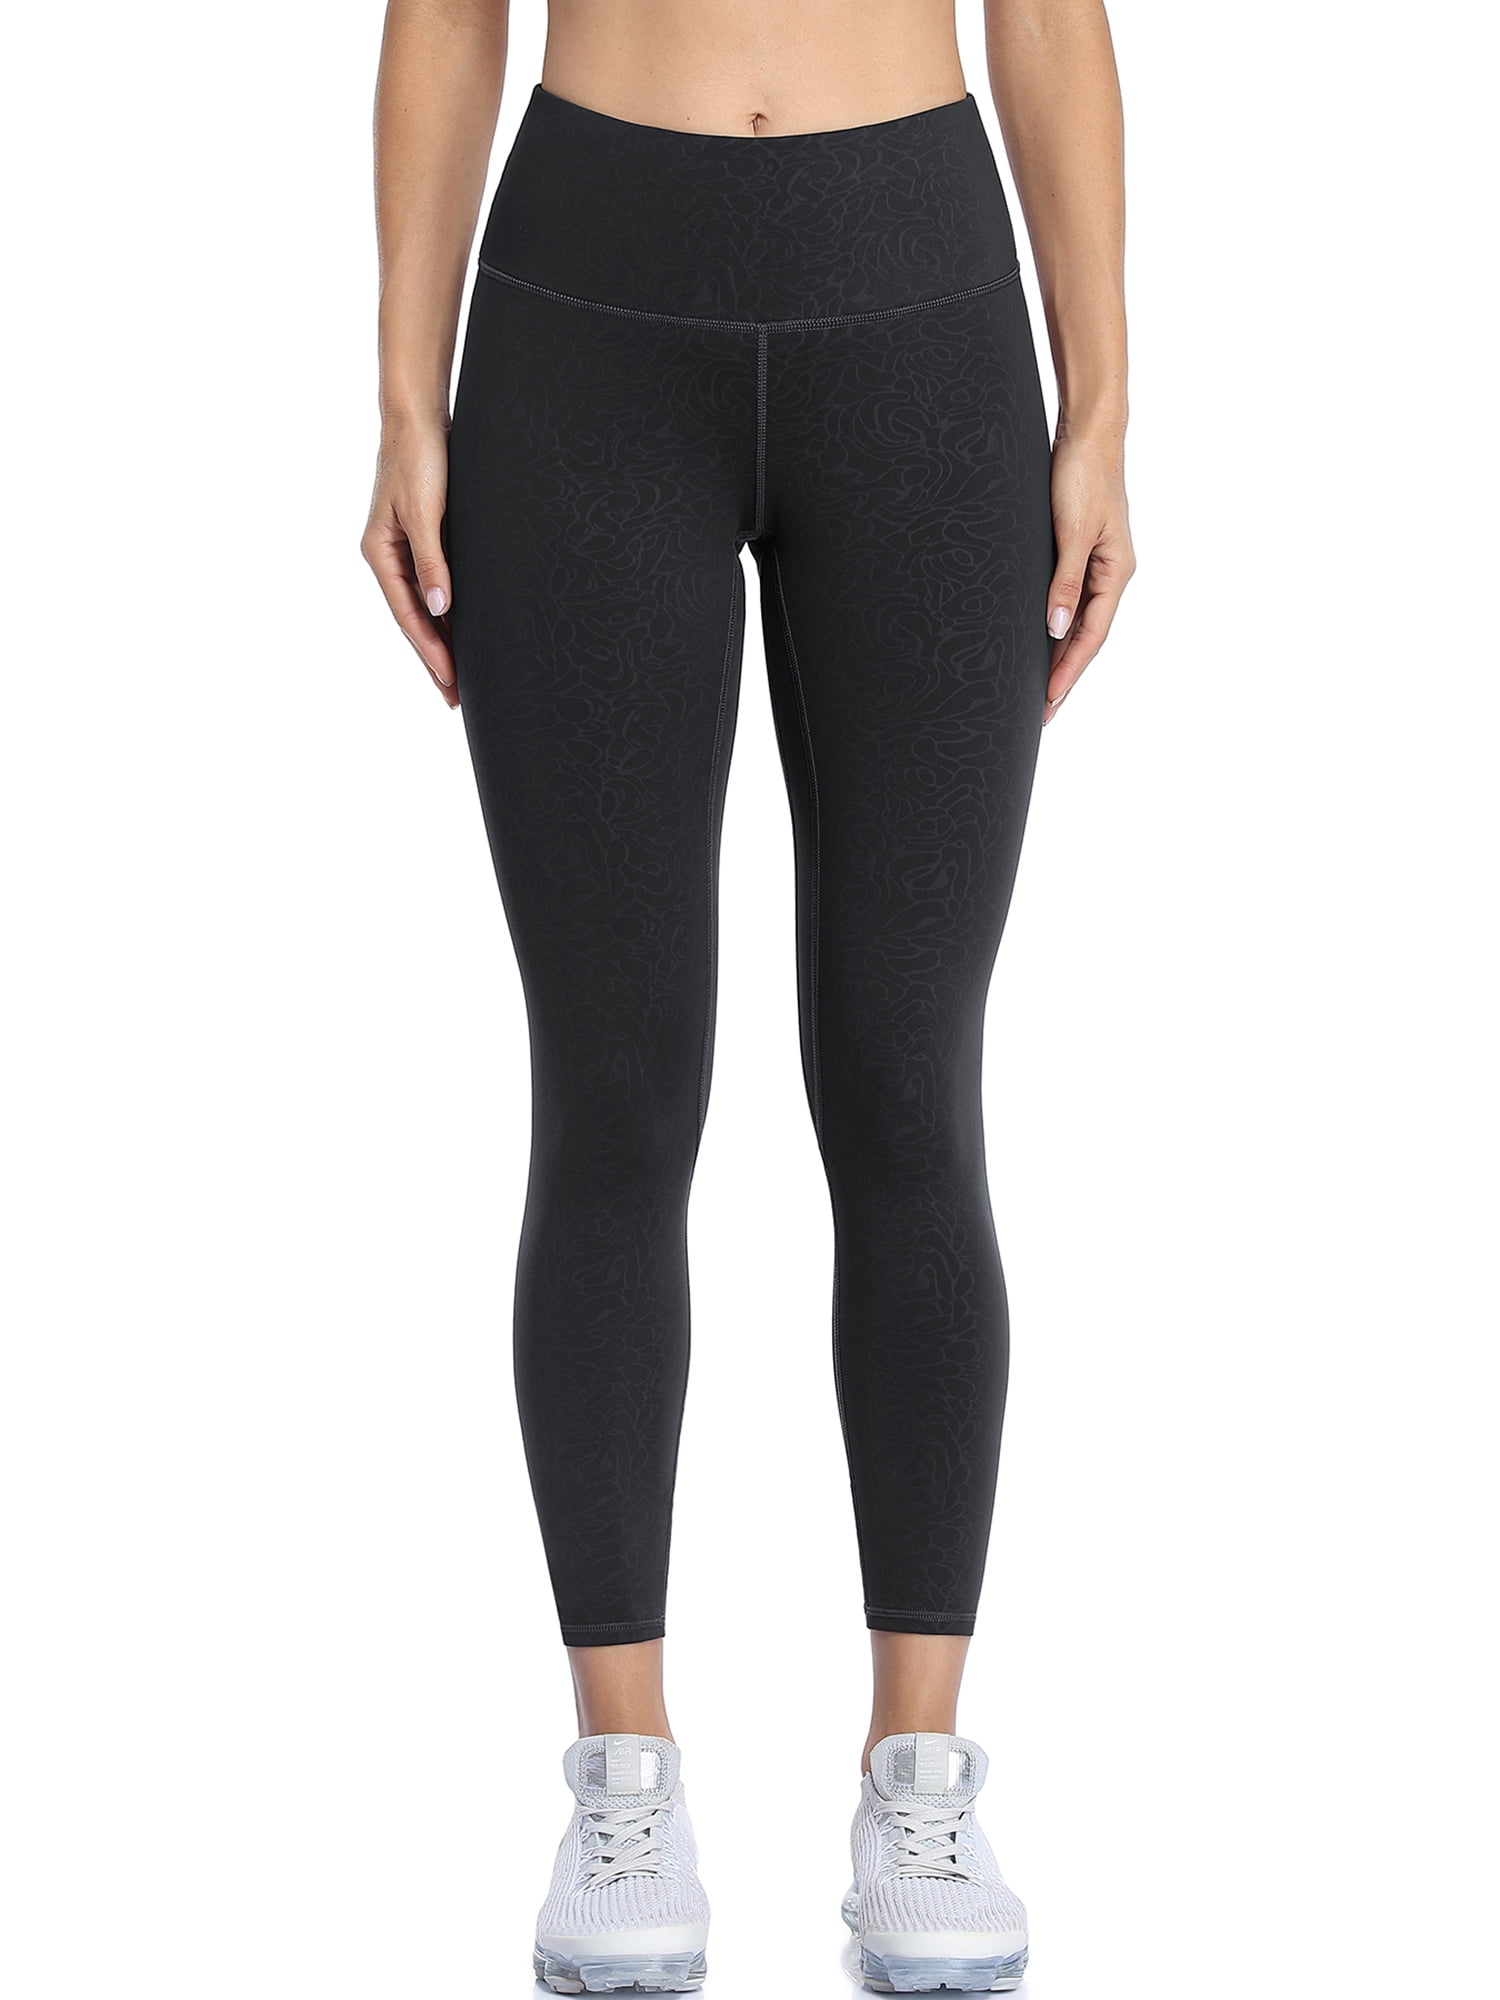 Women's Print High Rise Yoga Pants With Inner Pockets Tights